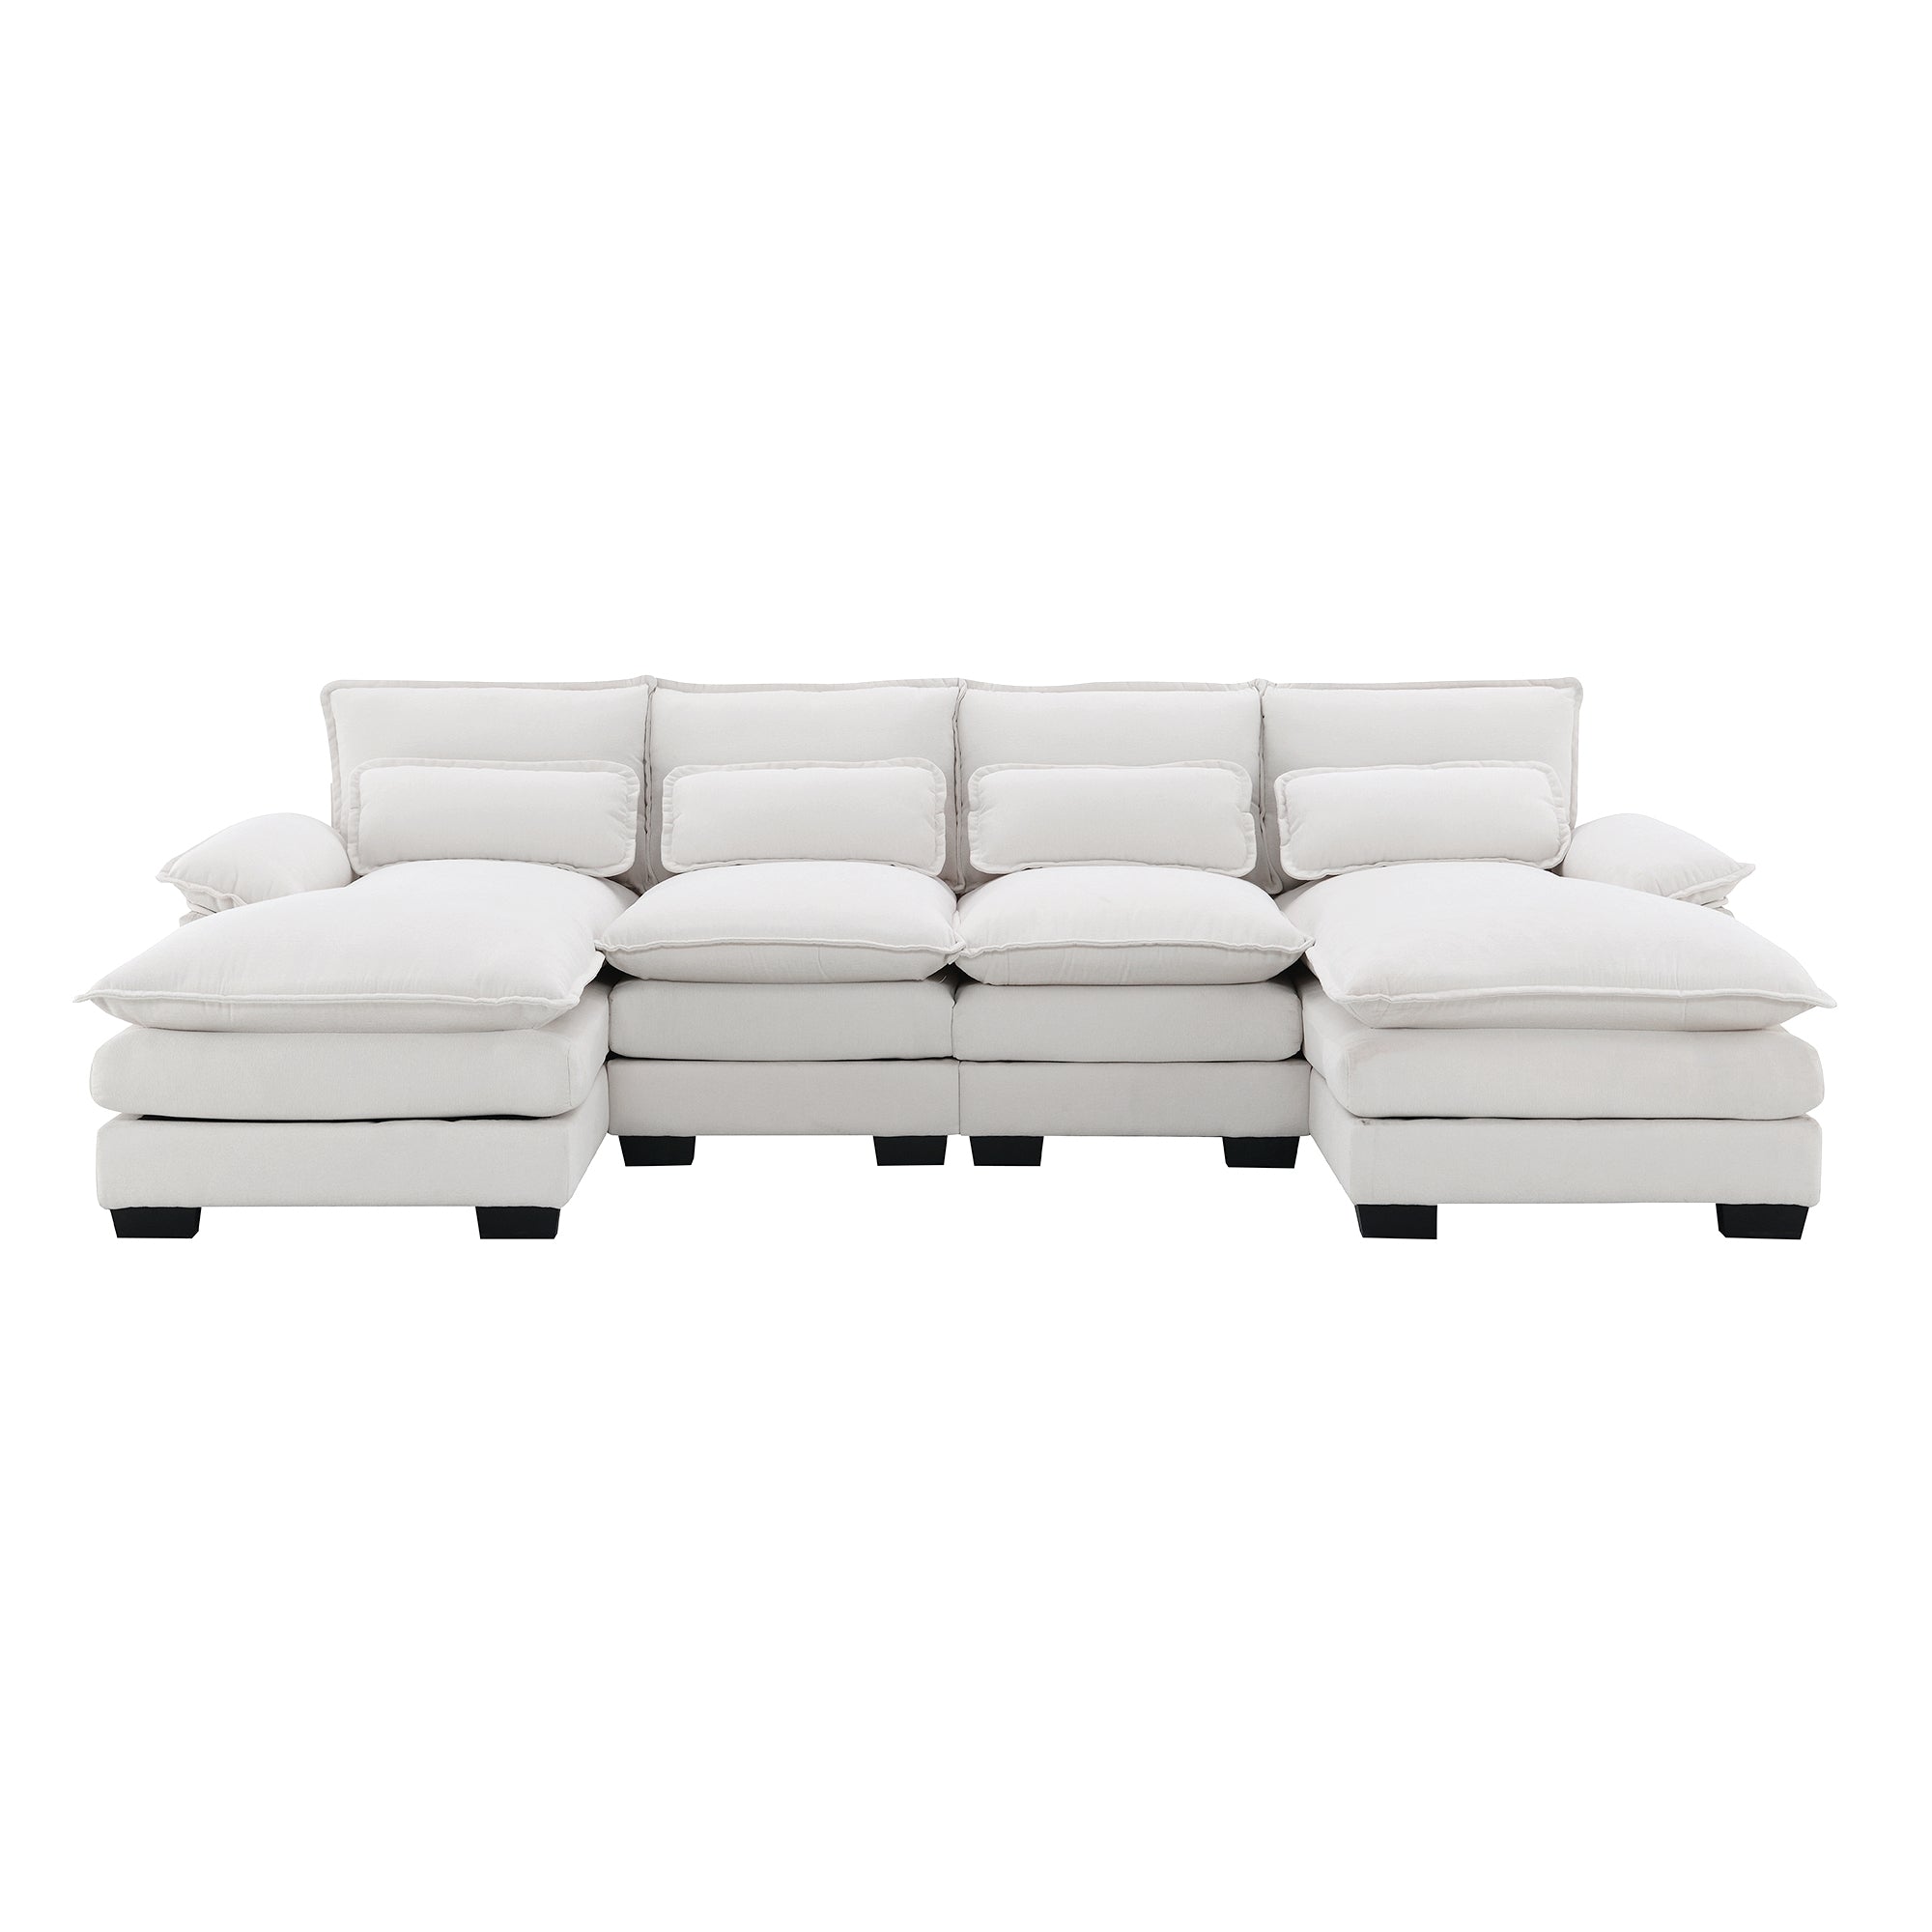 109.8*55.9" Modern U-shaped Sectional Sofa with Waist Pillows - 6-seat Upholstered Symmetrical Sofa Furniture - Sleeper Sofa Couch with Chaise Lounge for Living Room, Apartment